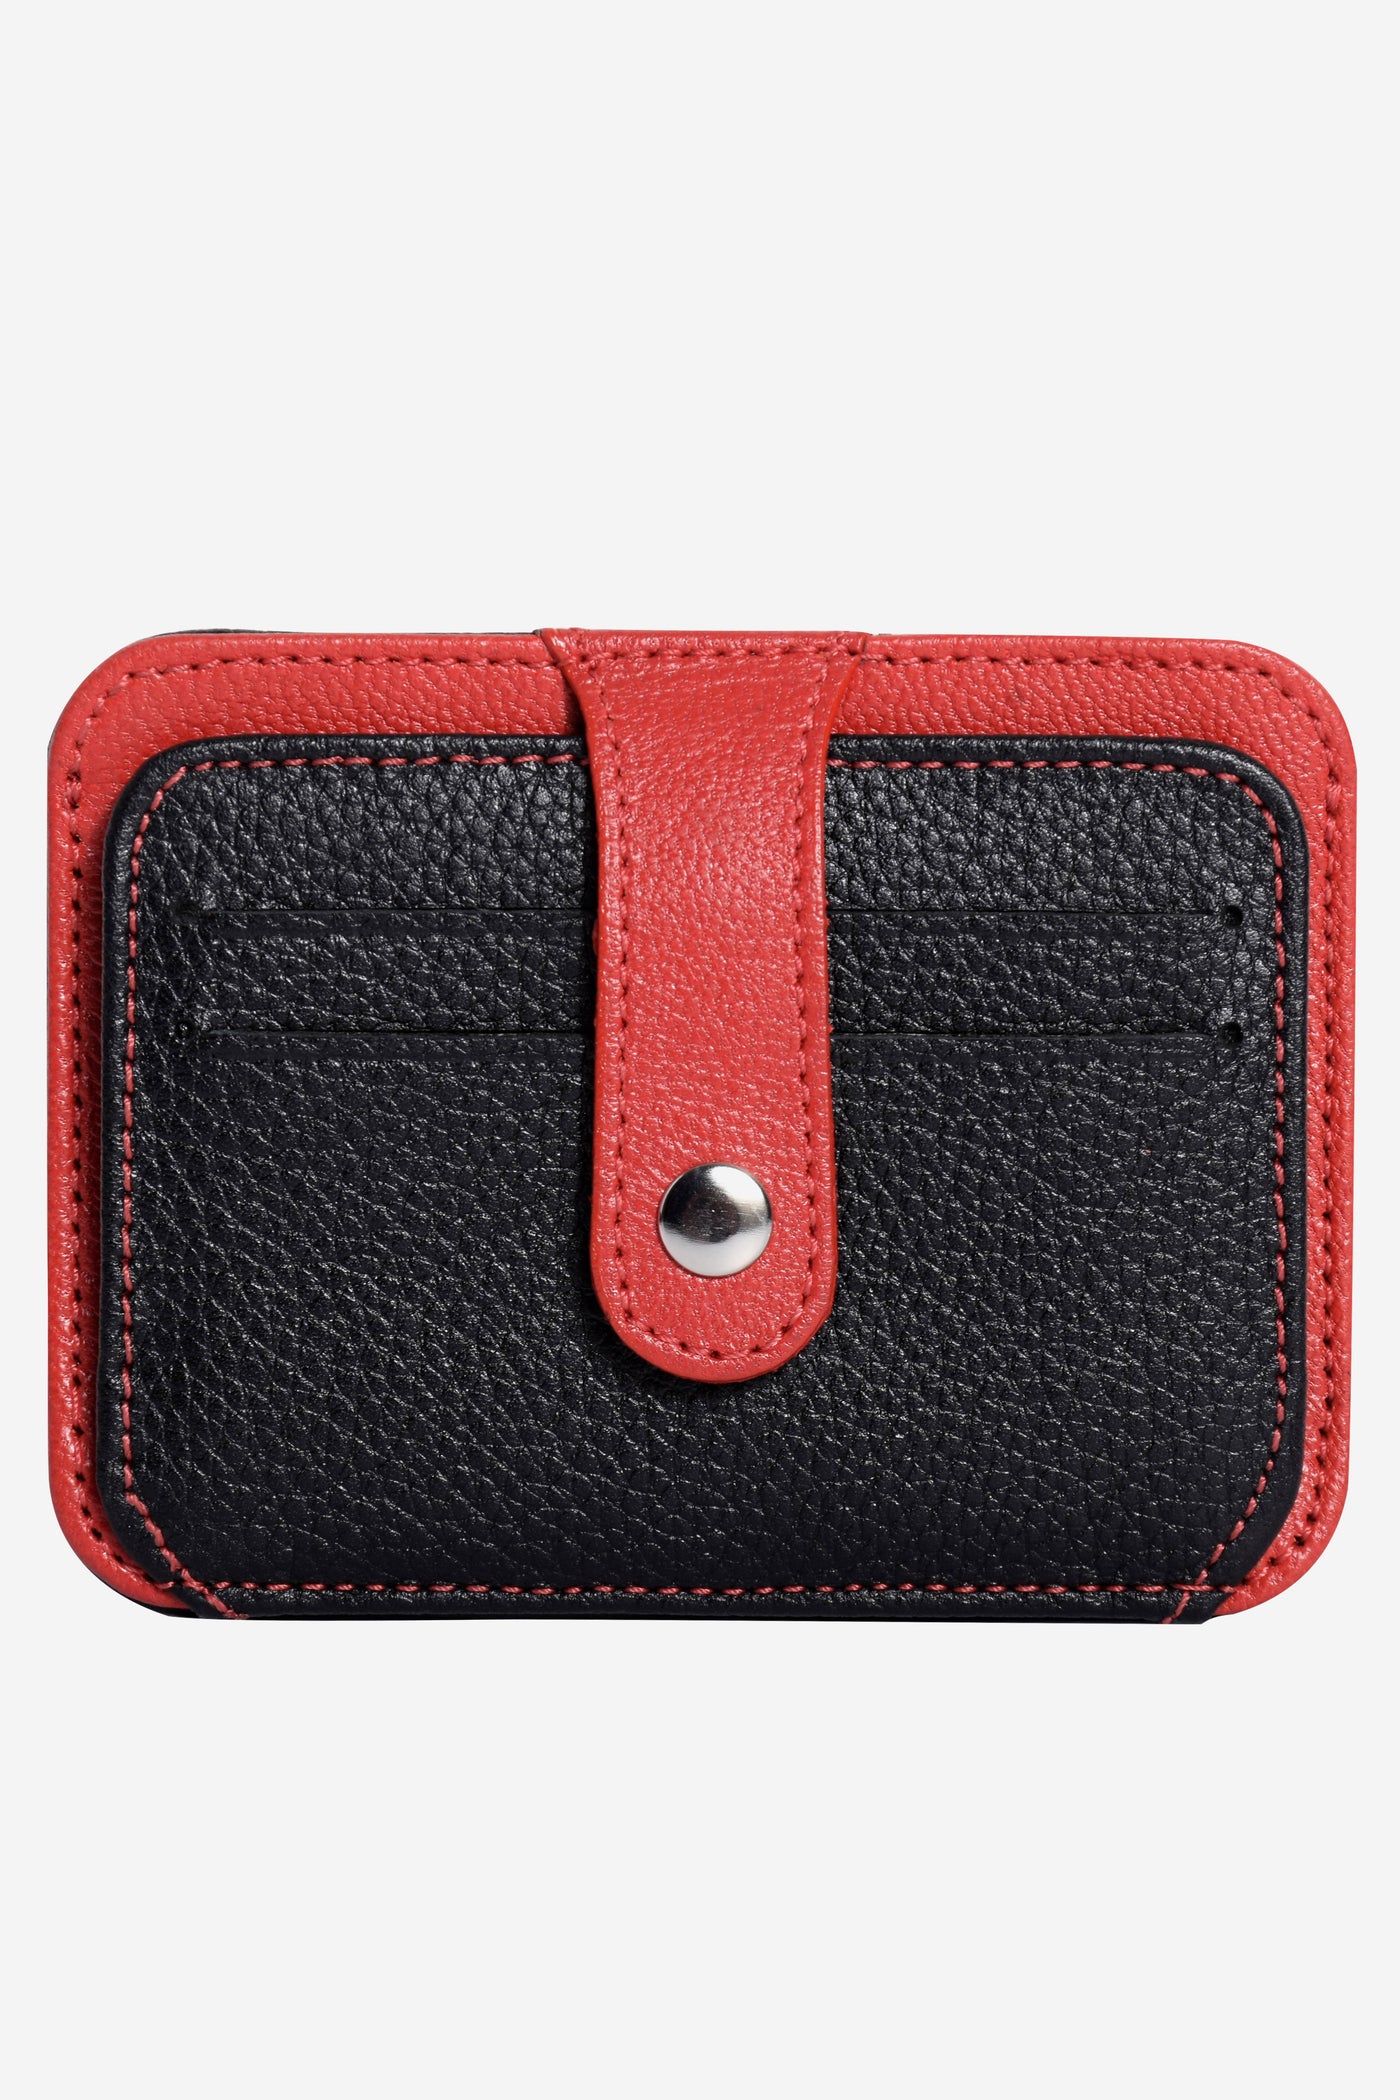 WAL001 / Red Black Leather Card Holder